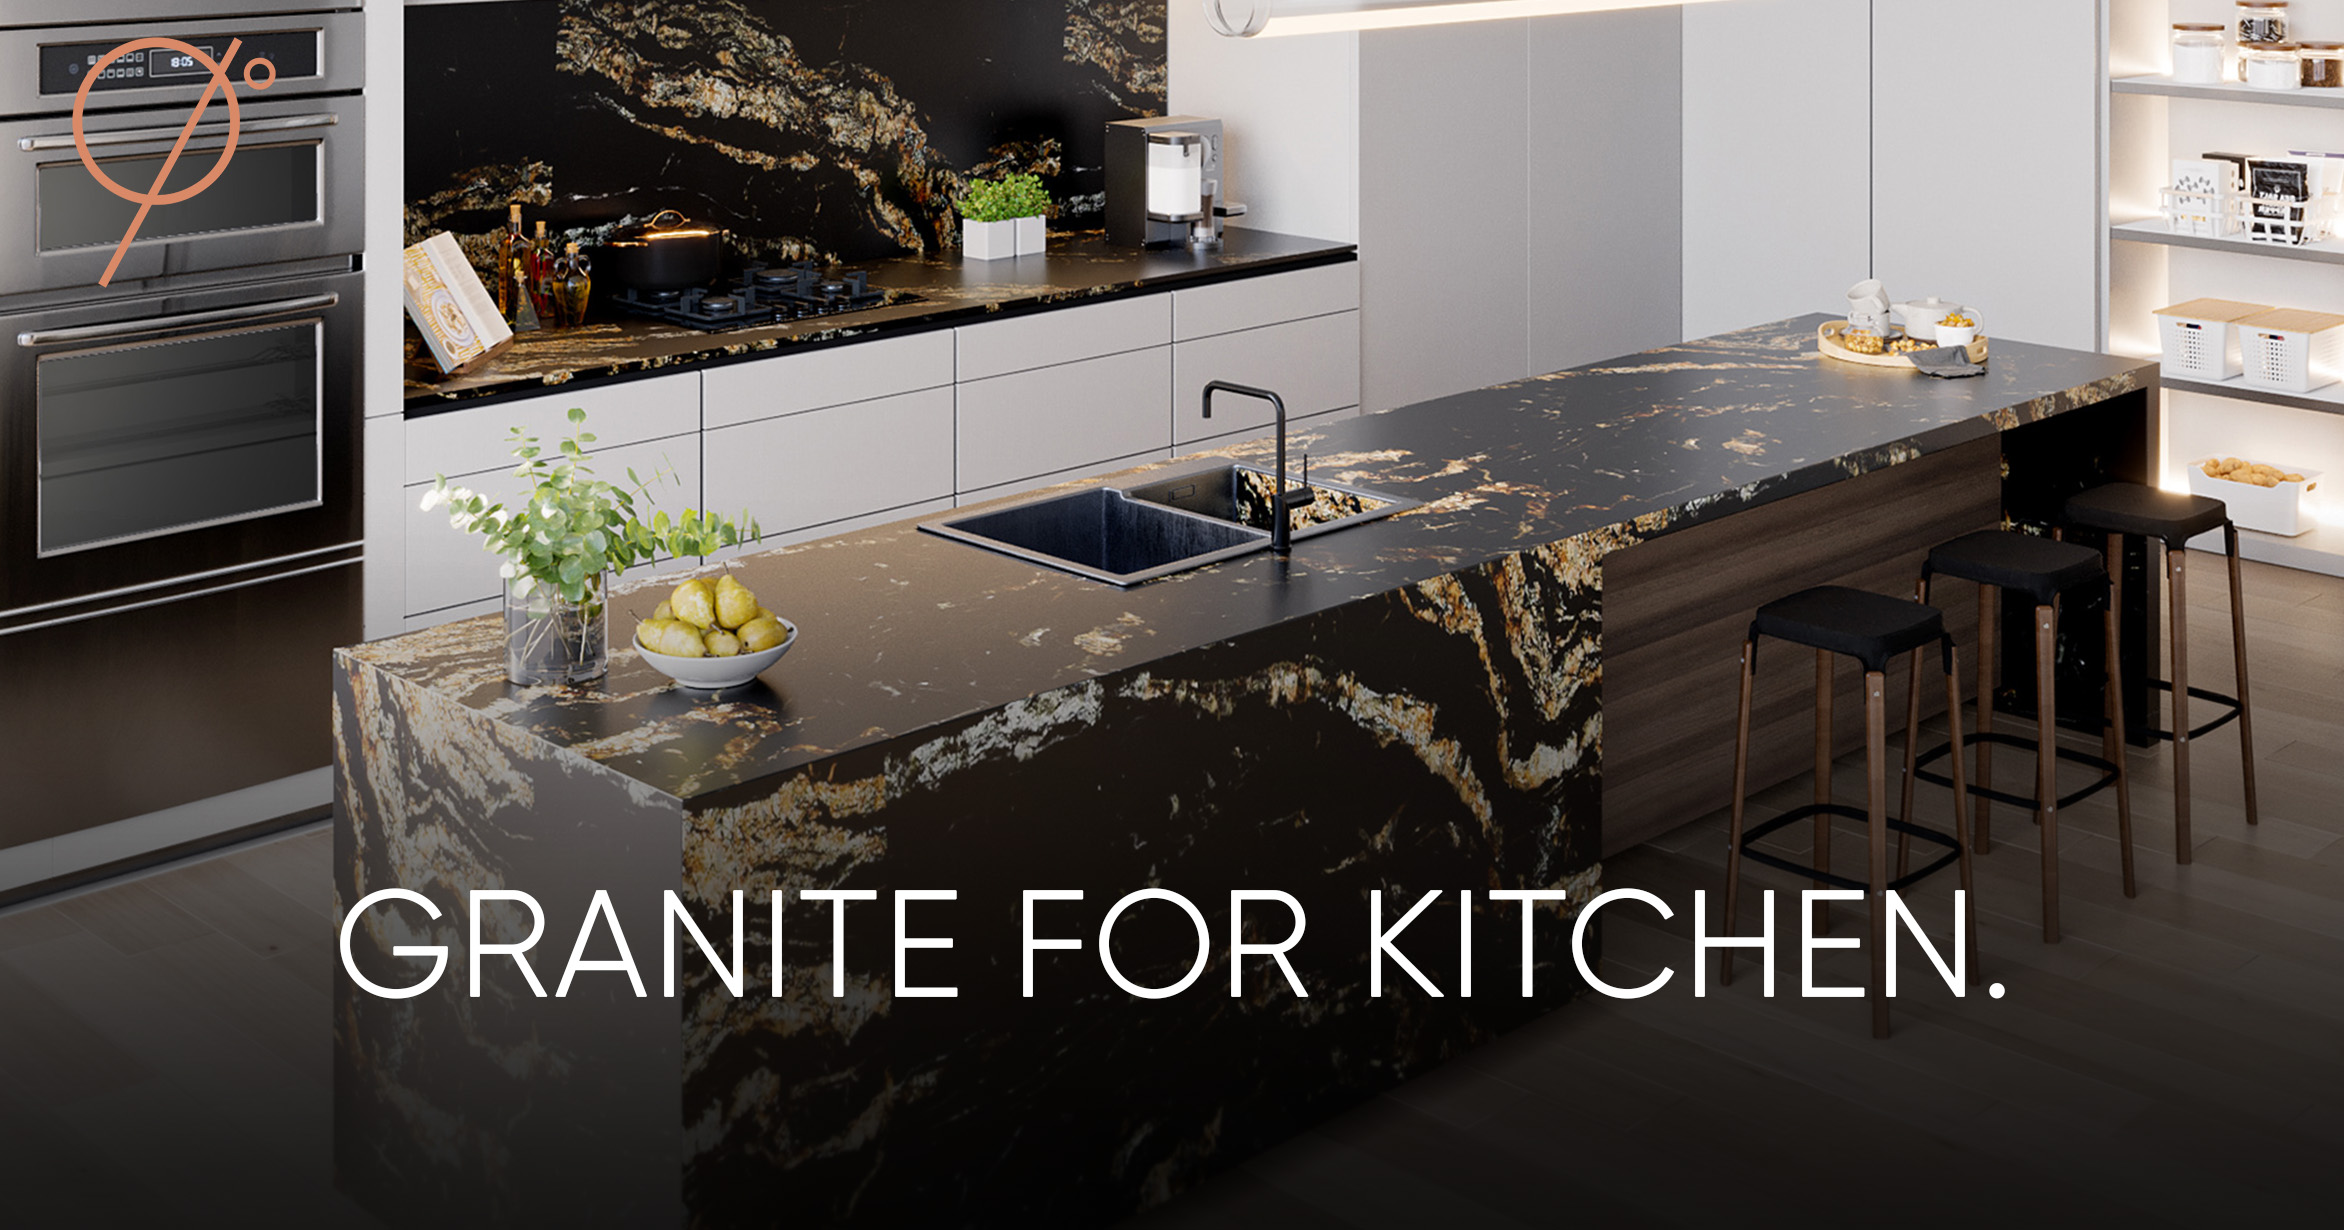 Granite in Kitchen: How & Where to use granite in your kitchen?